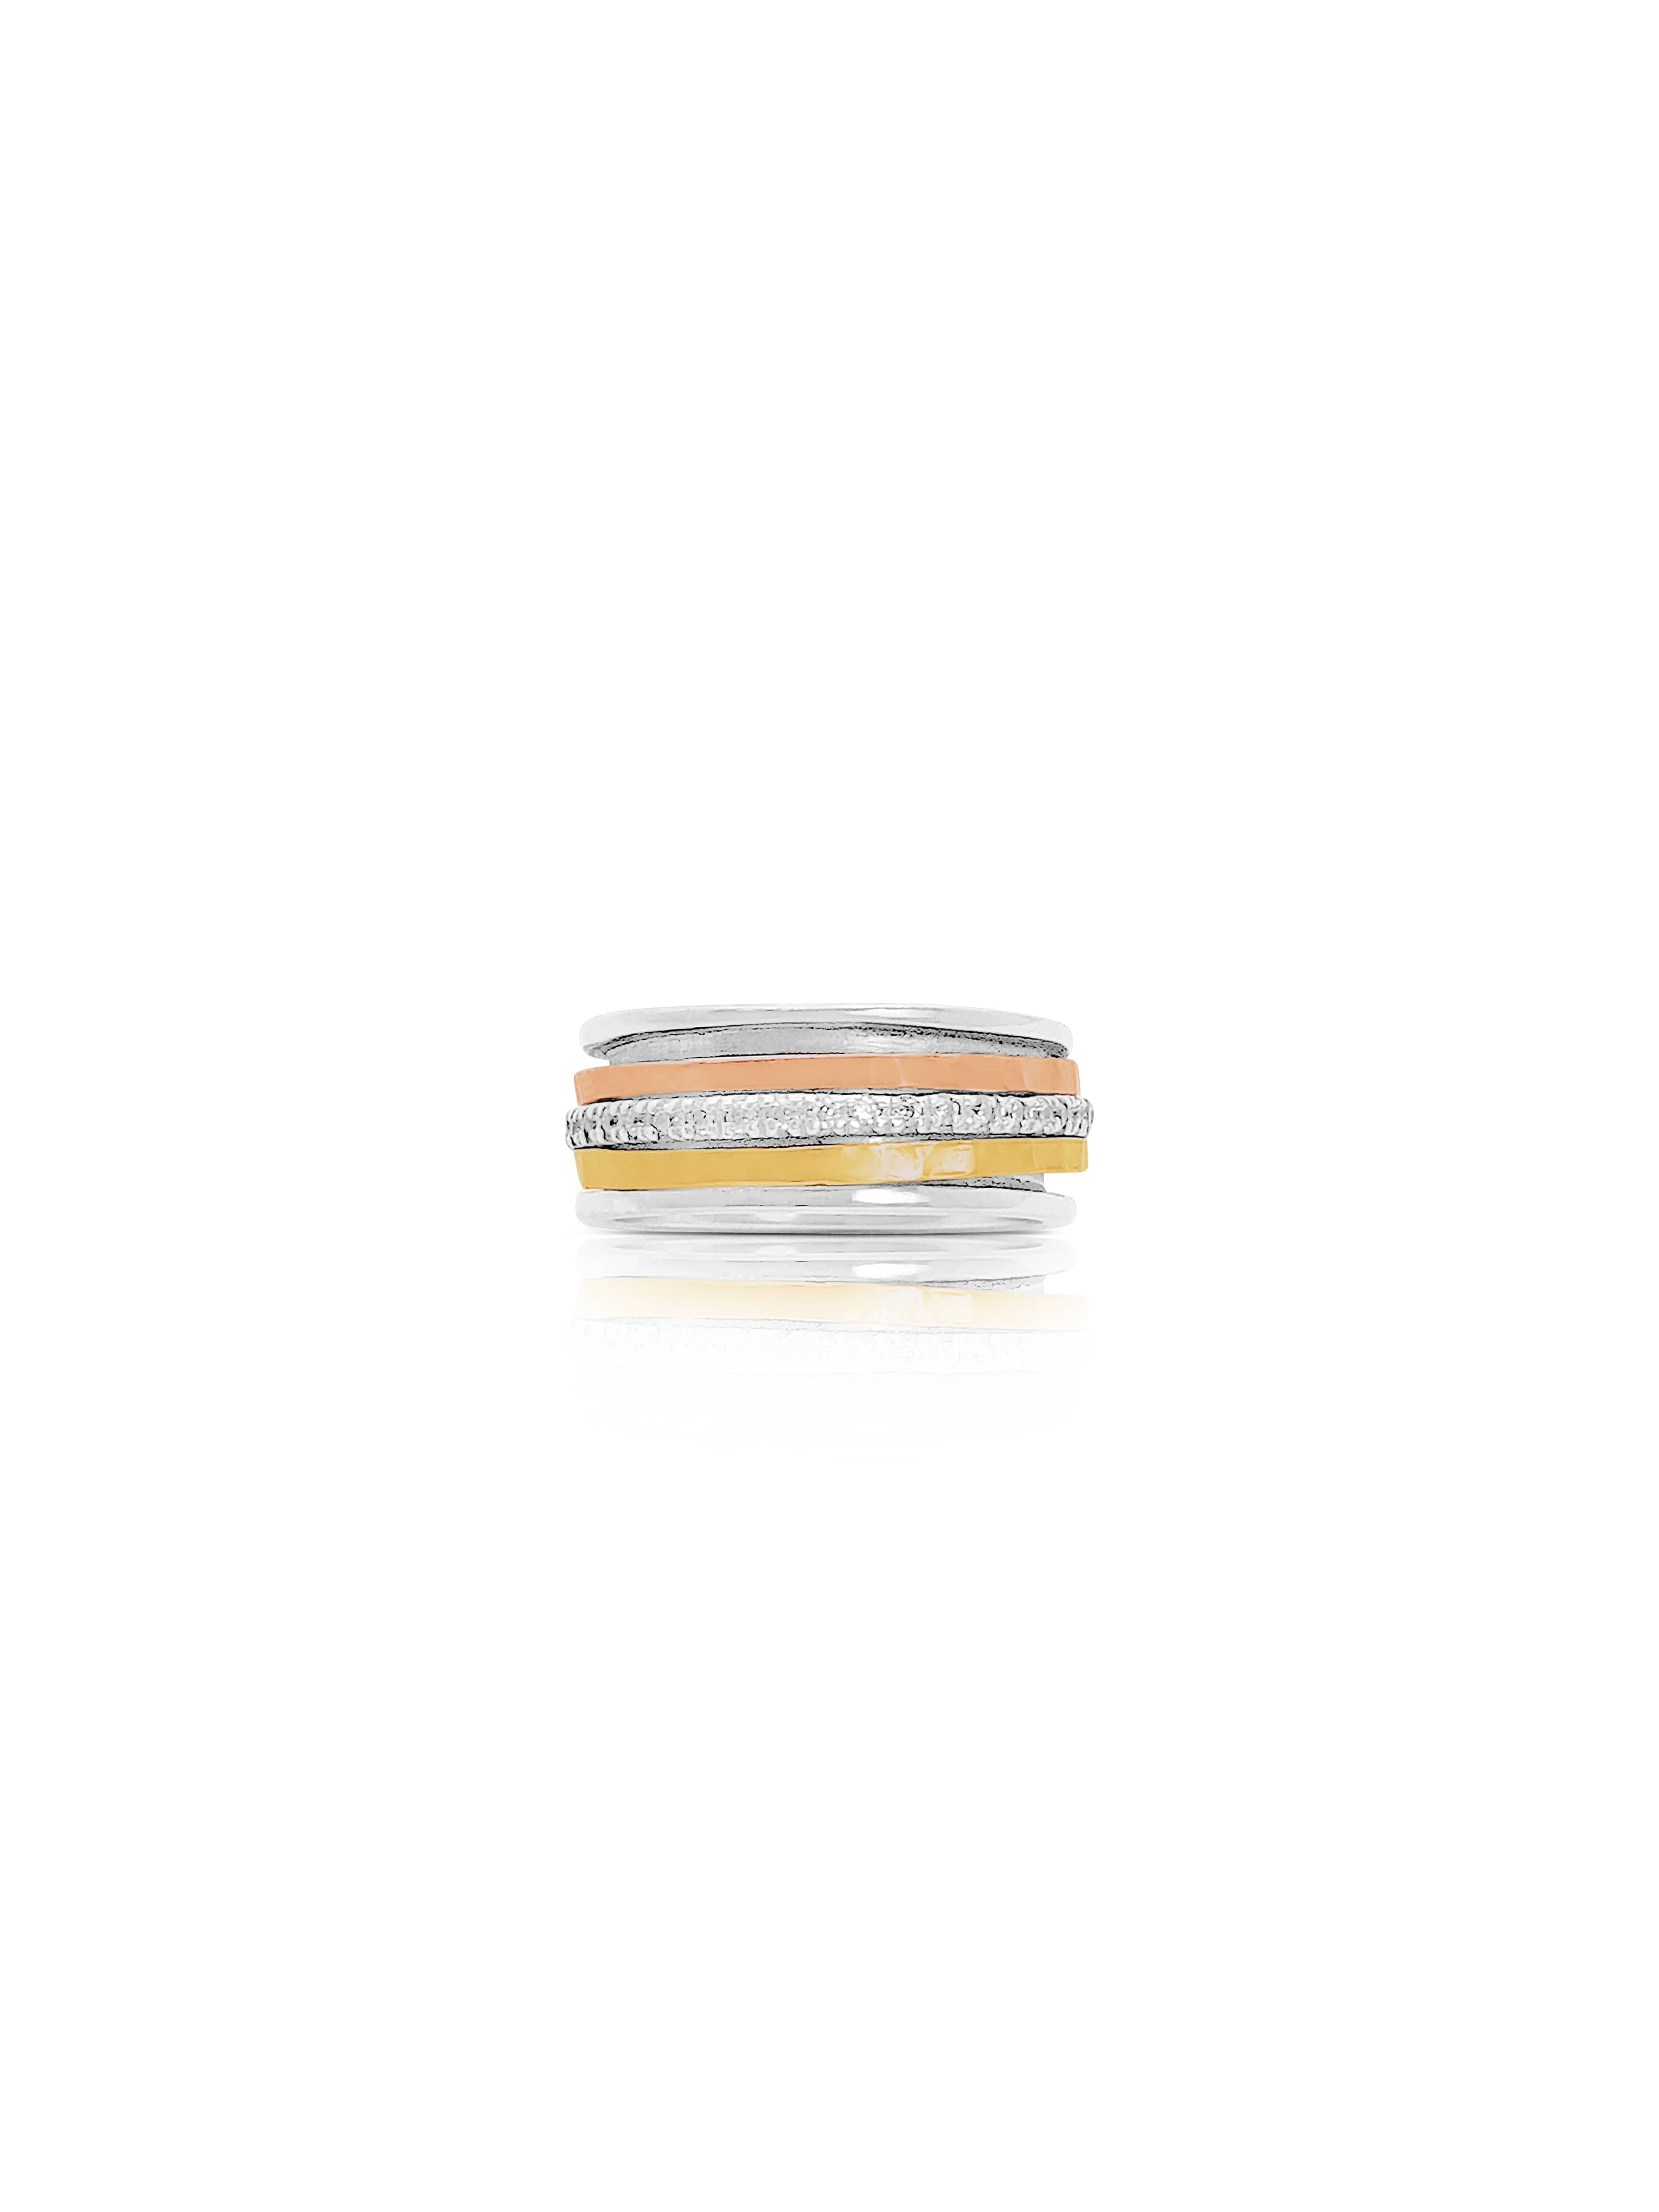 Small Sterling Silver Spinner Ring